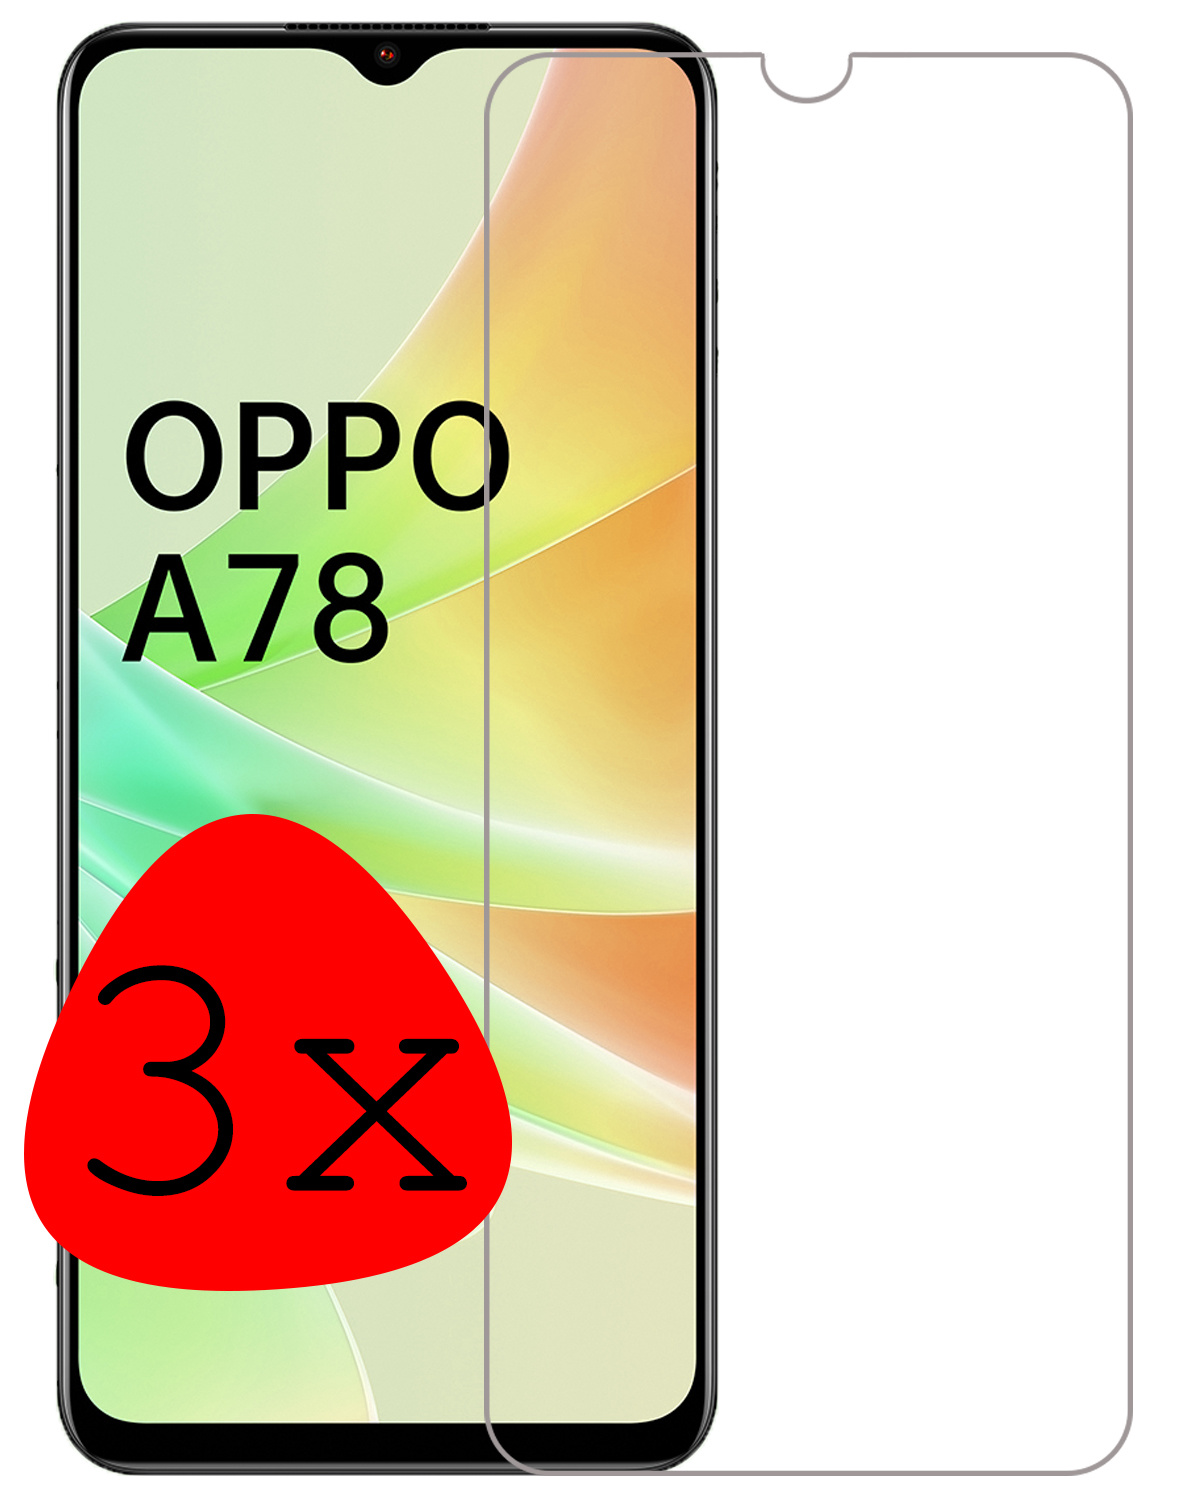 BASEY.  OPPO A78 Screenprotector Tempered Glass - OPPO A78 Beschermglas Screen Protector Glas - 3 Stuks